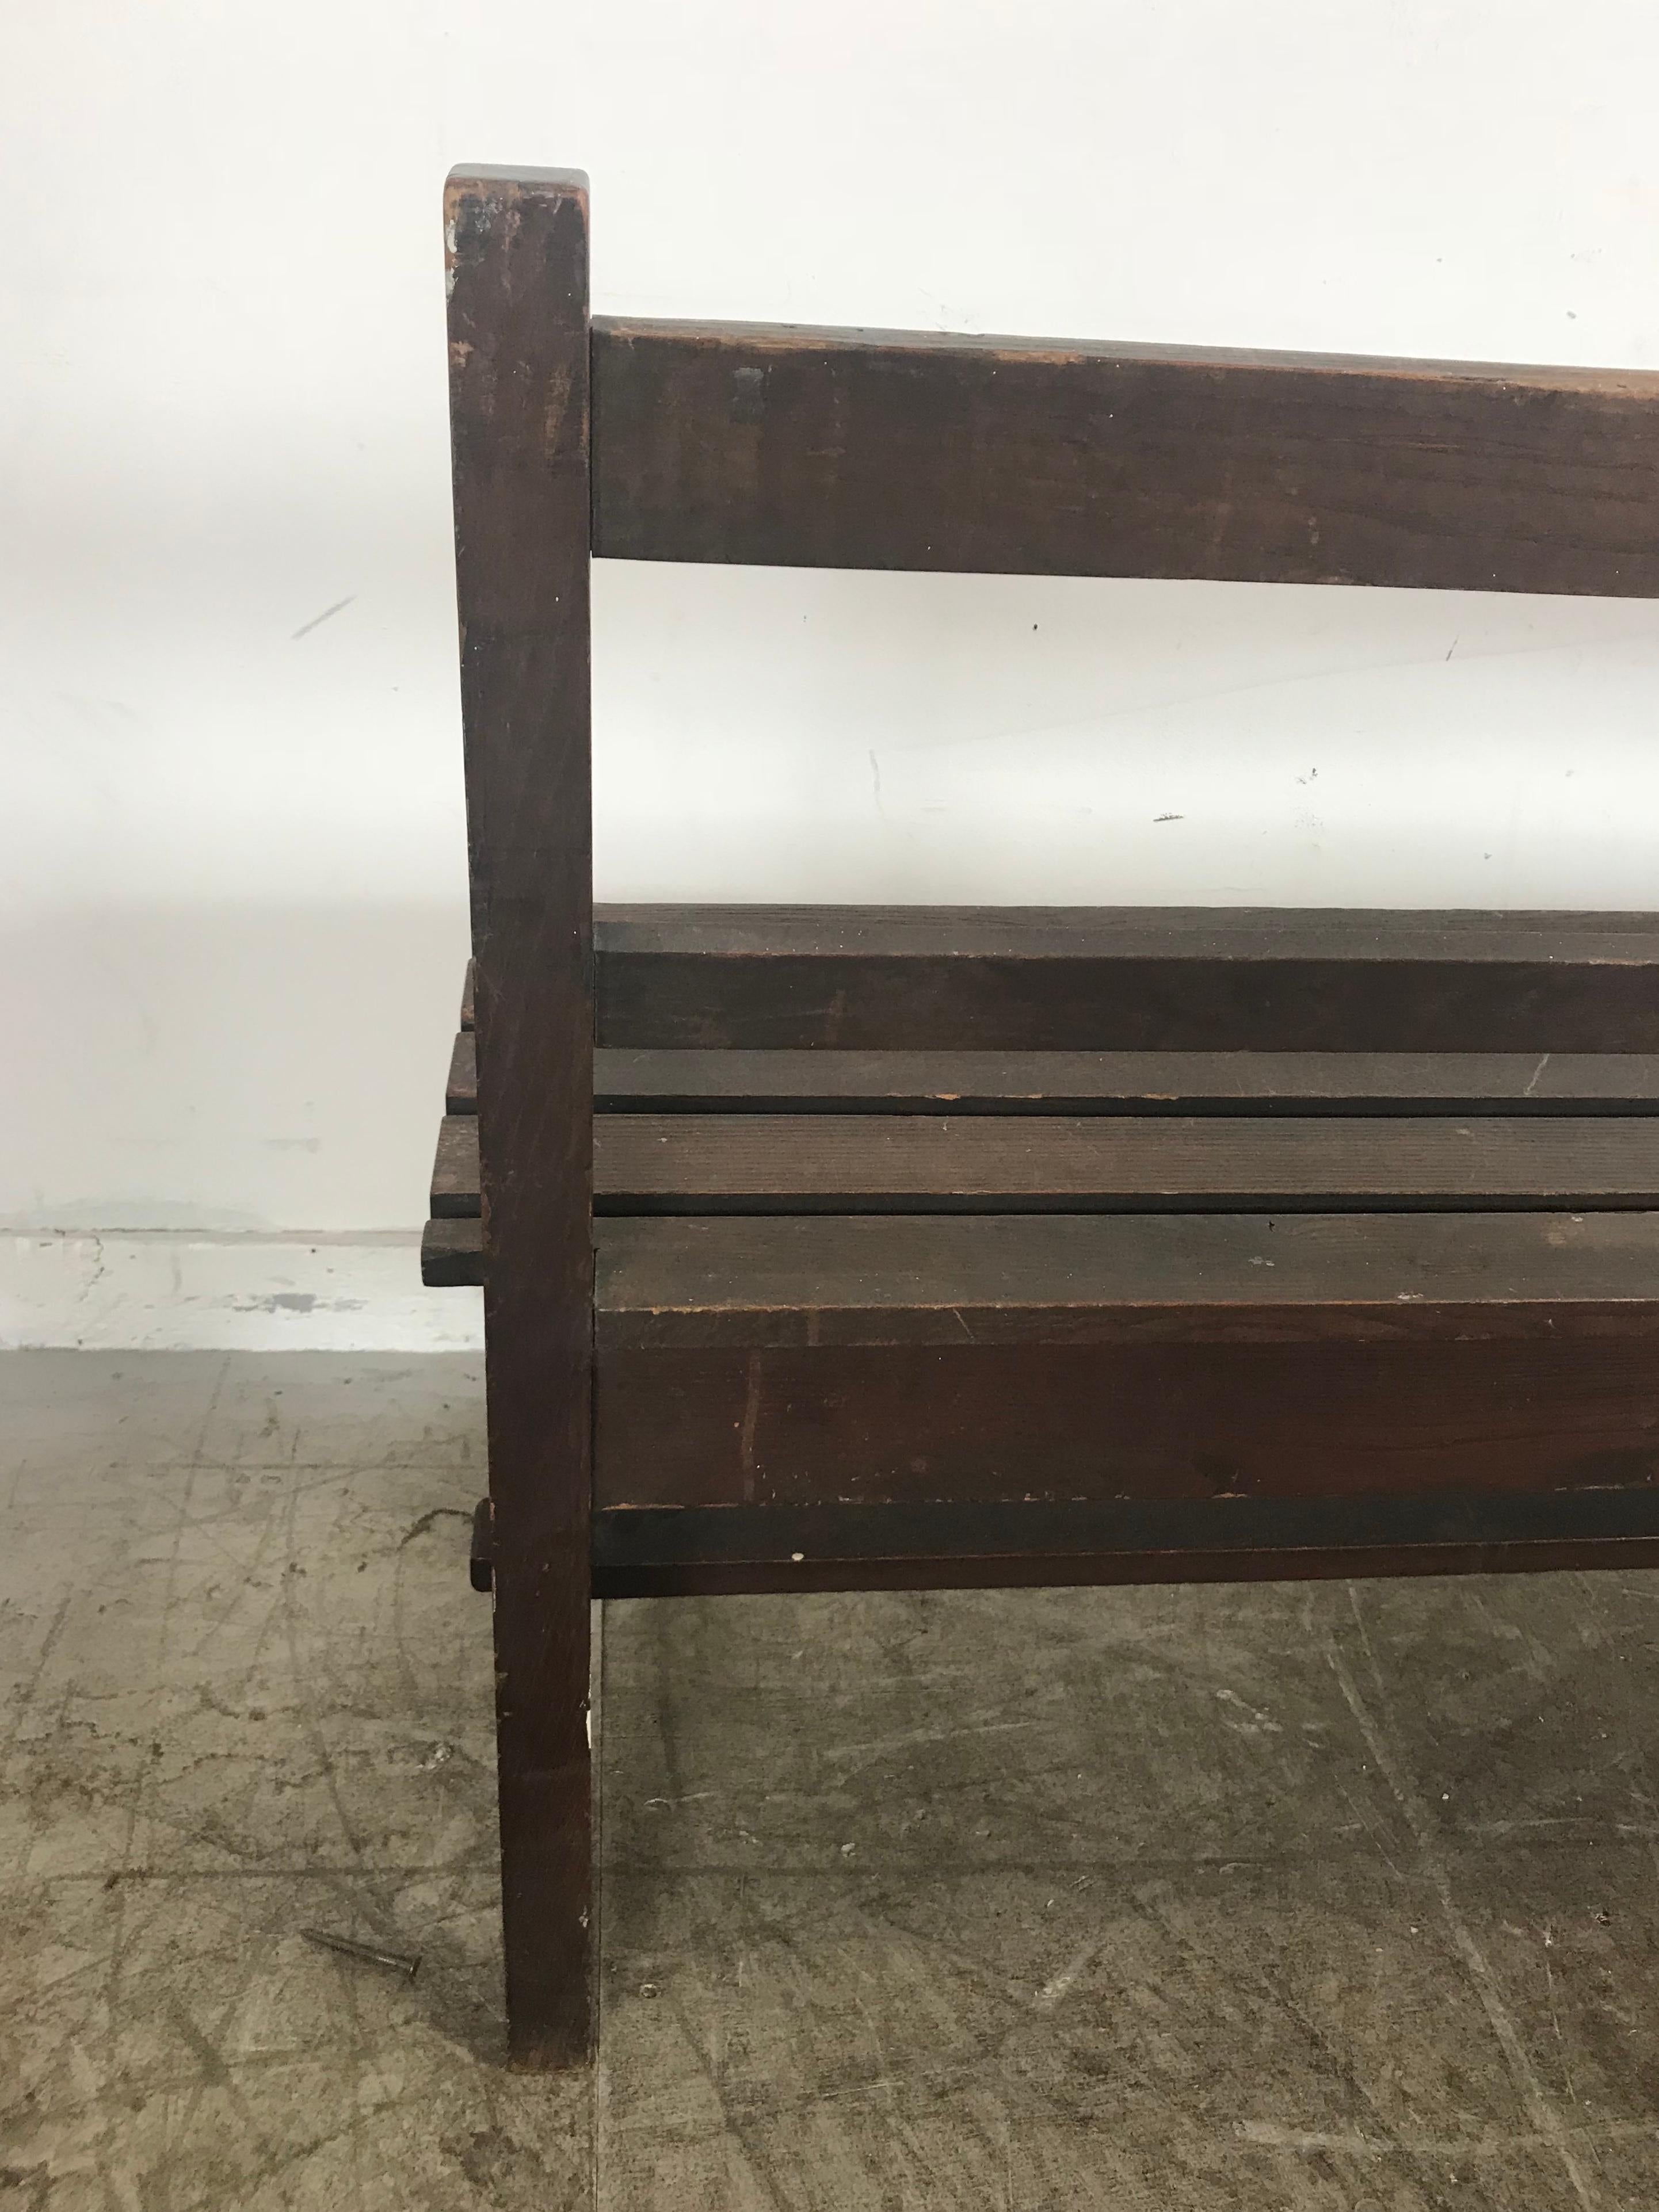 Rare Pair of Roycroft Oak Benches, Inventory Number from the Inn, circa 1905 For Sale 7